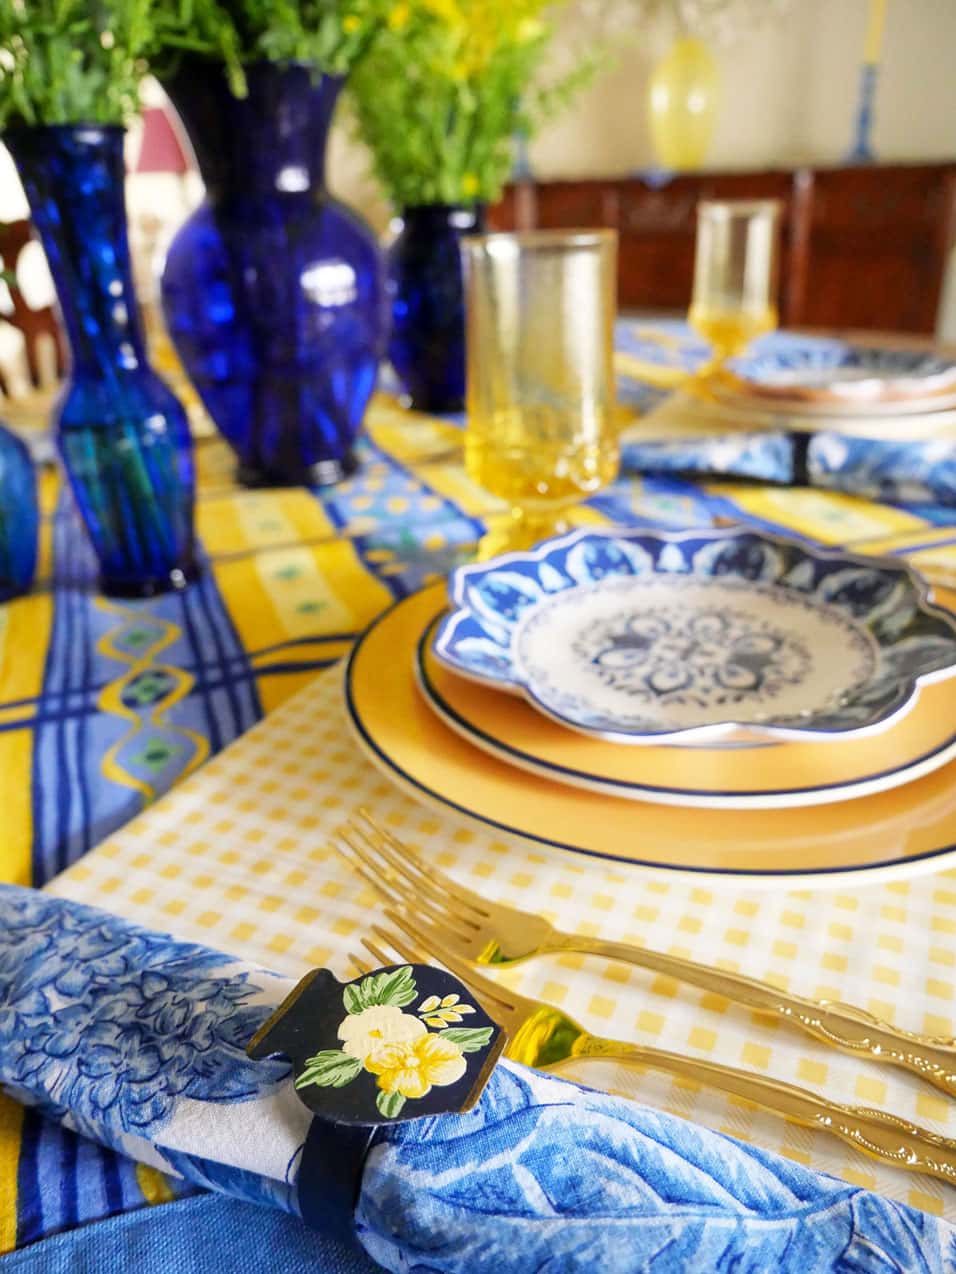 Napkin ring on blue and yellow tablescape